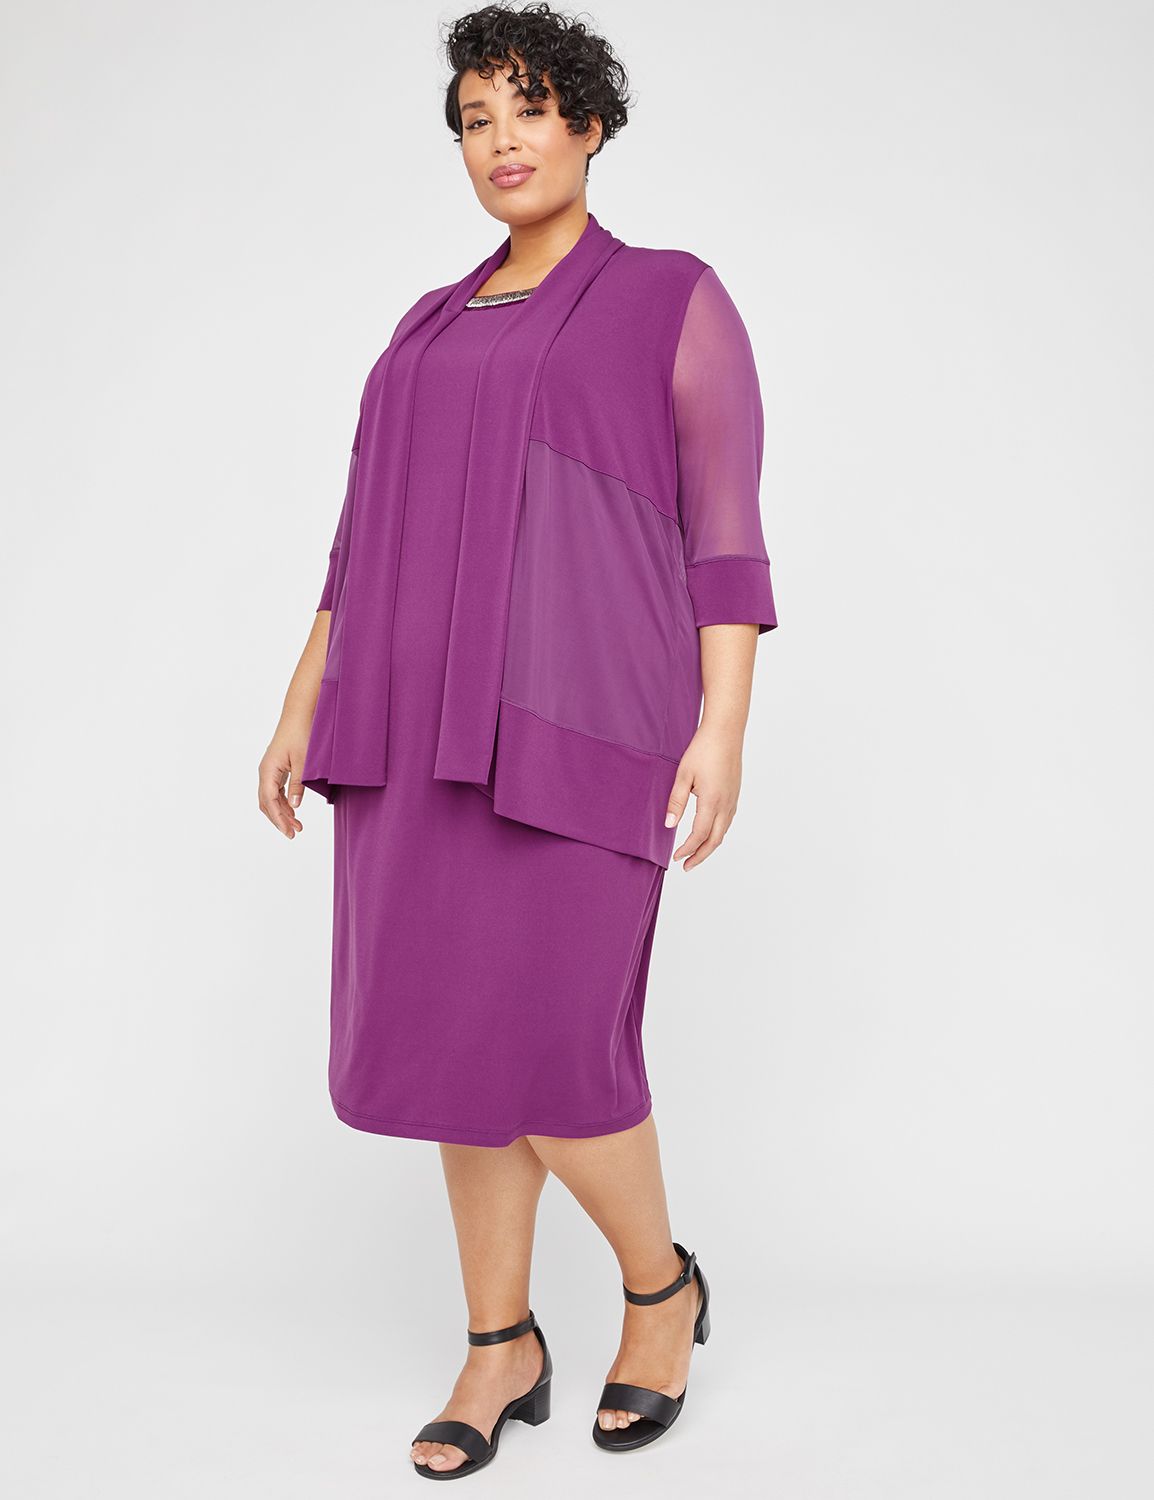 catherines plus size formal wear